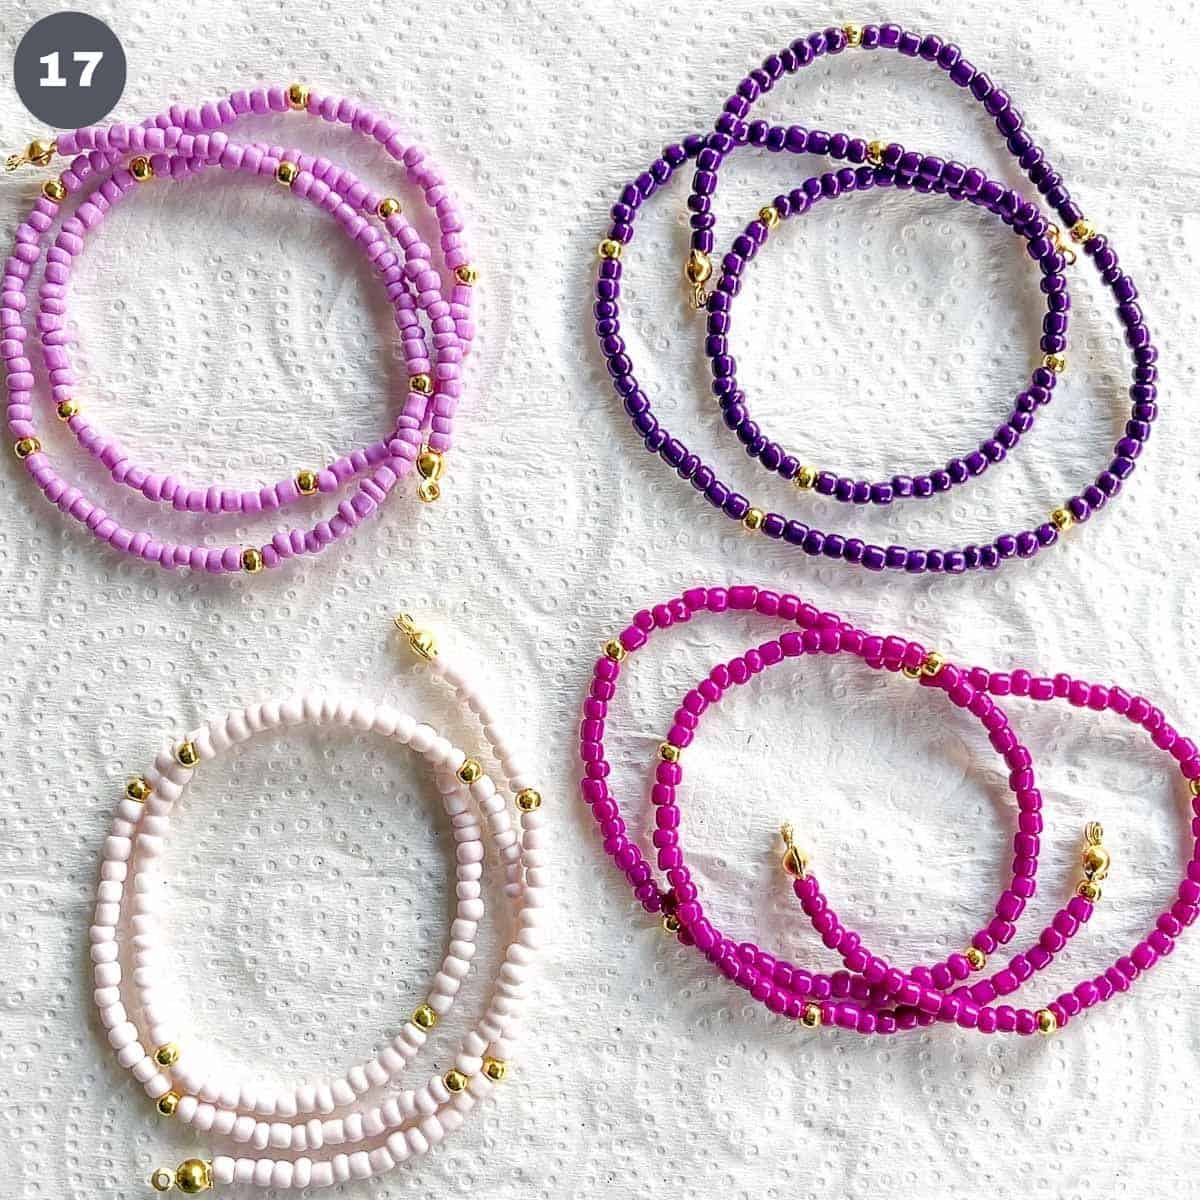 4 strands of beads in different purple hues.